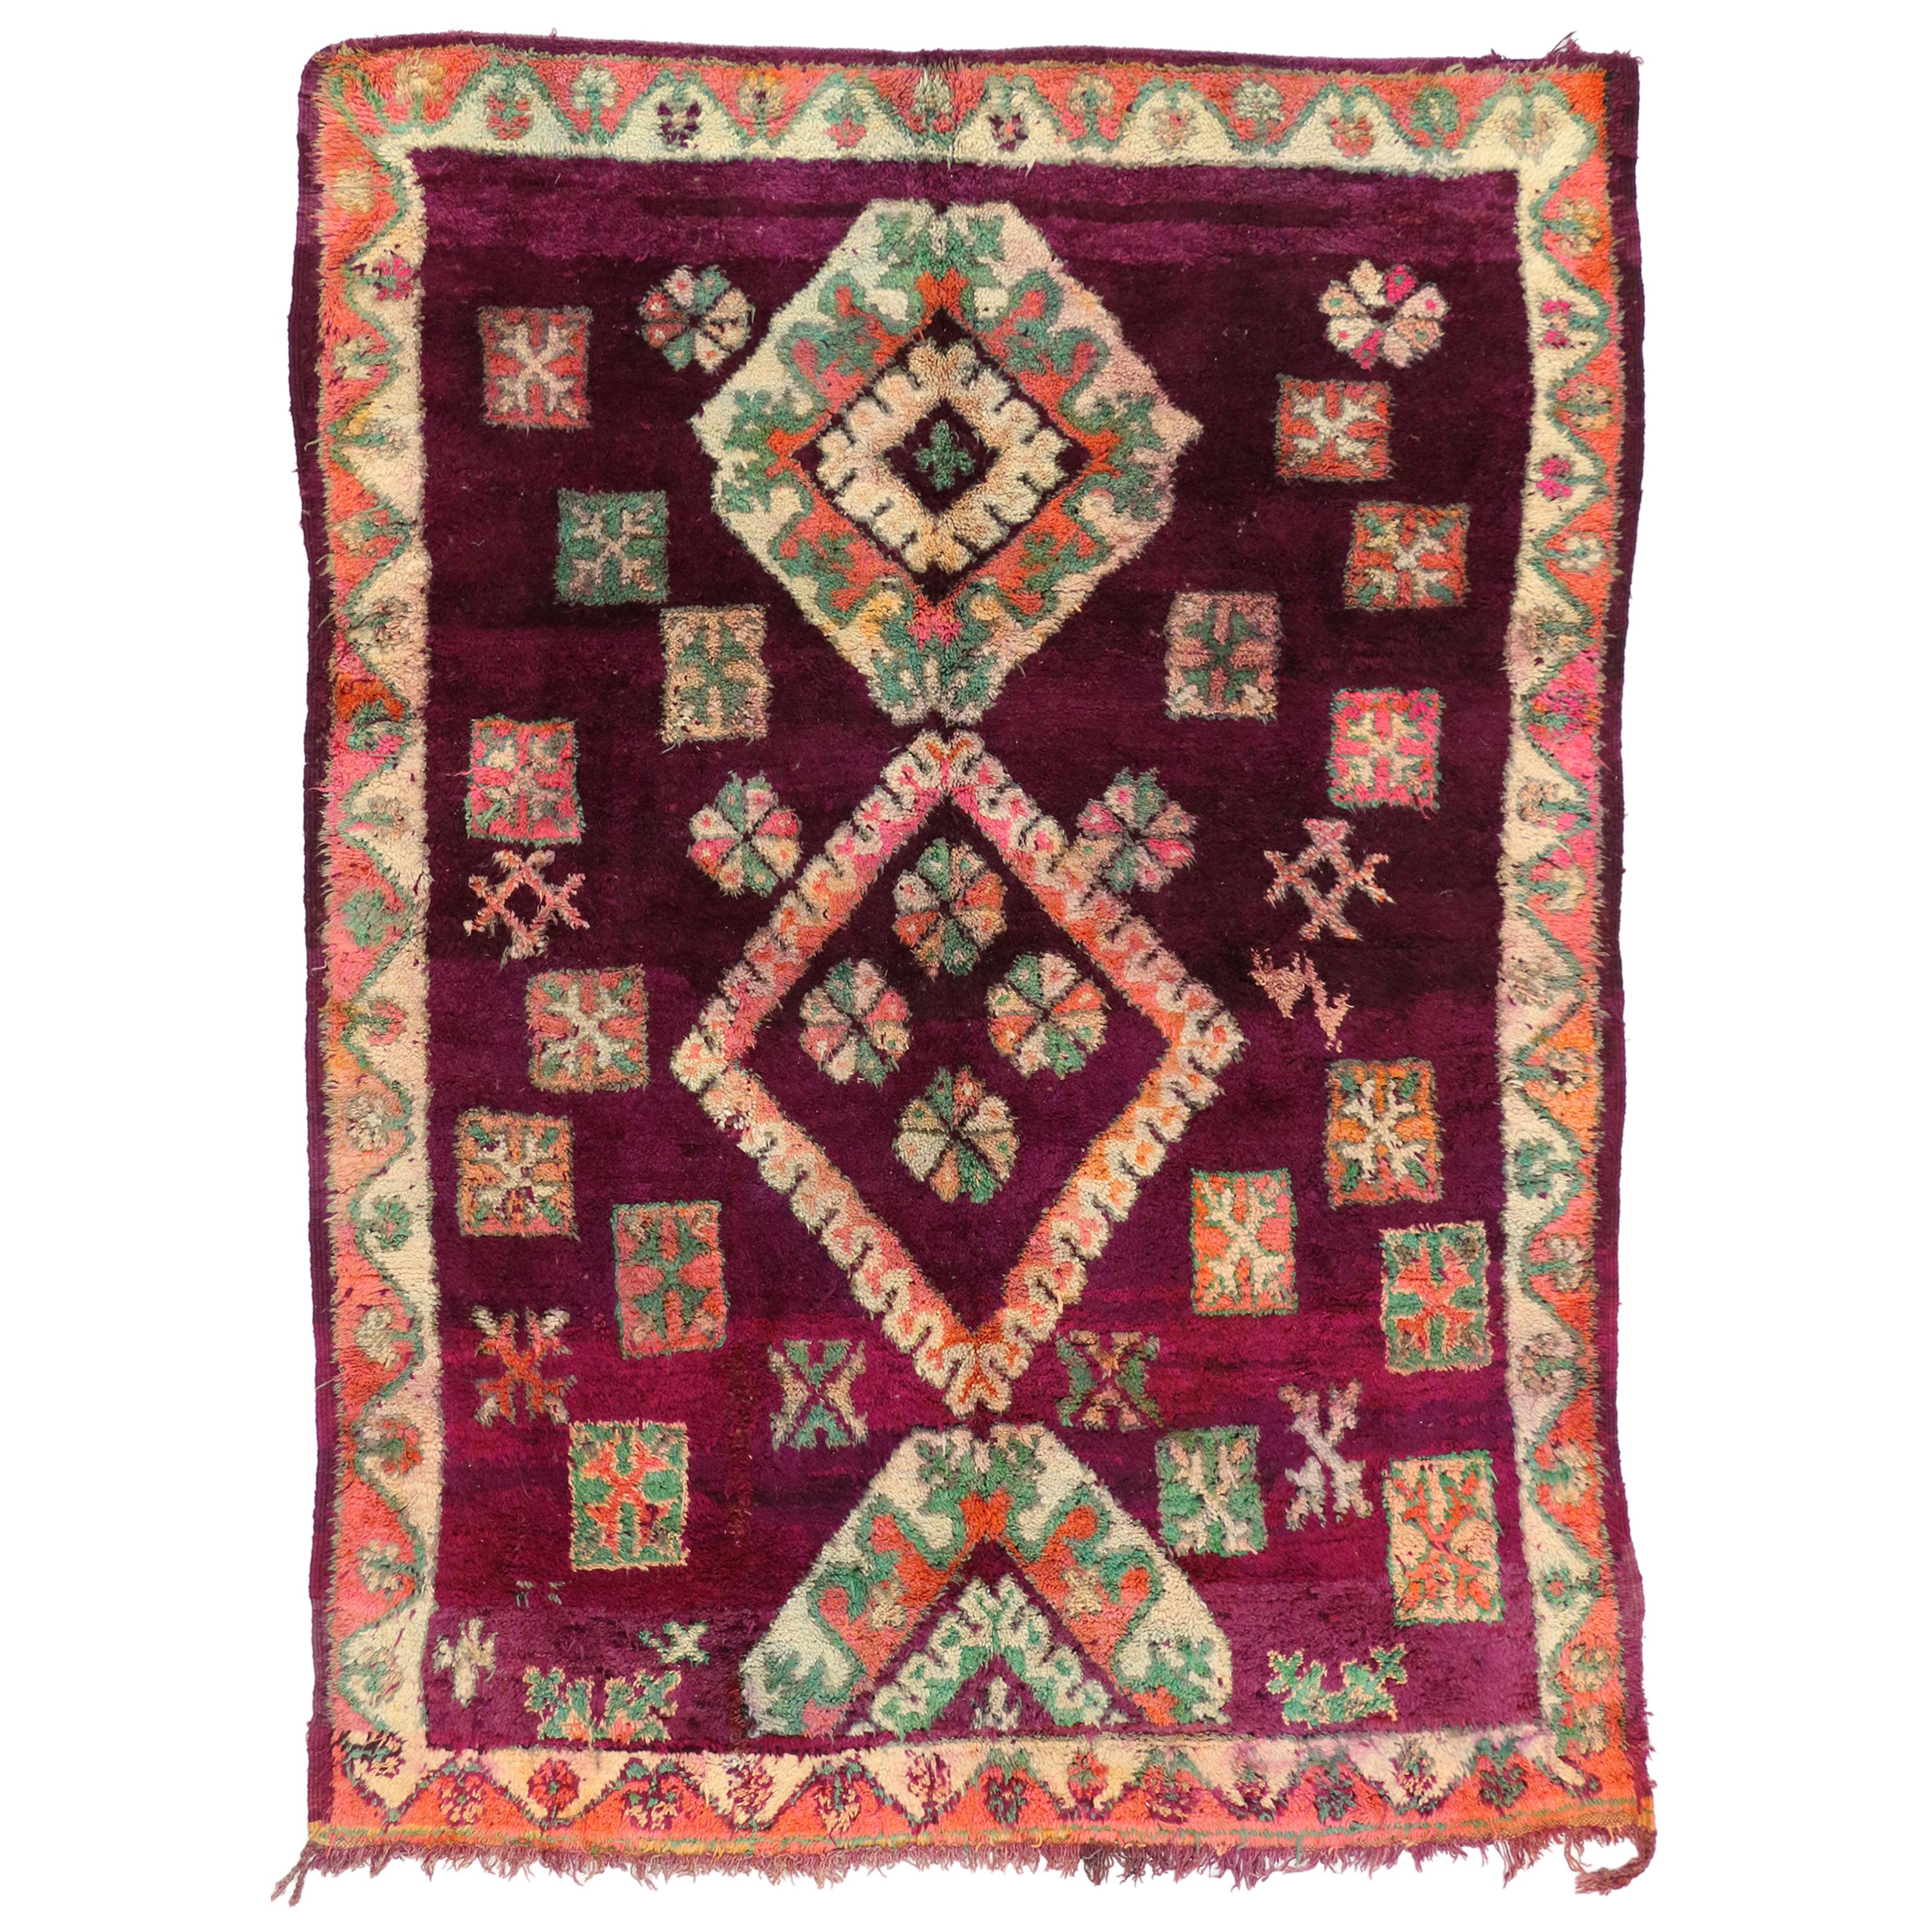 Vintage Moroccan Boujad Rug with Tribal Style, Colorful Moroccan Berber Carpet